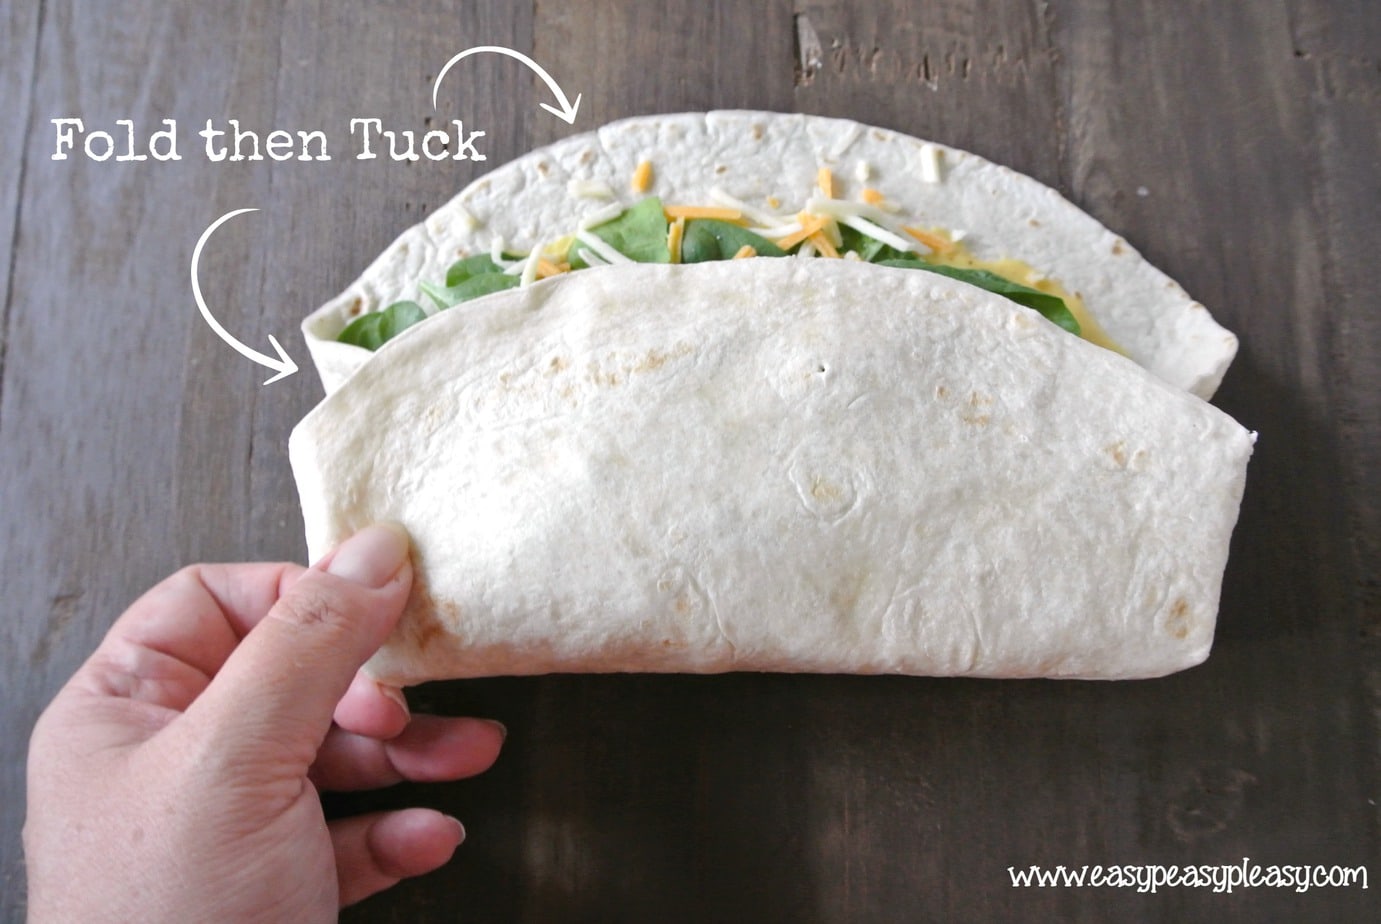 How to make a picture perfect wrap. Fold then tuck.